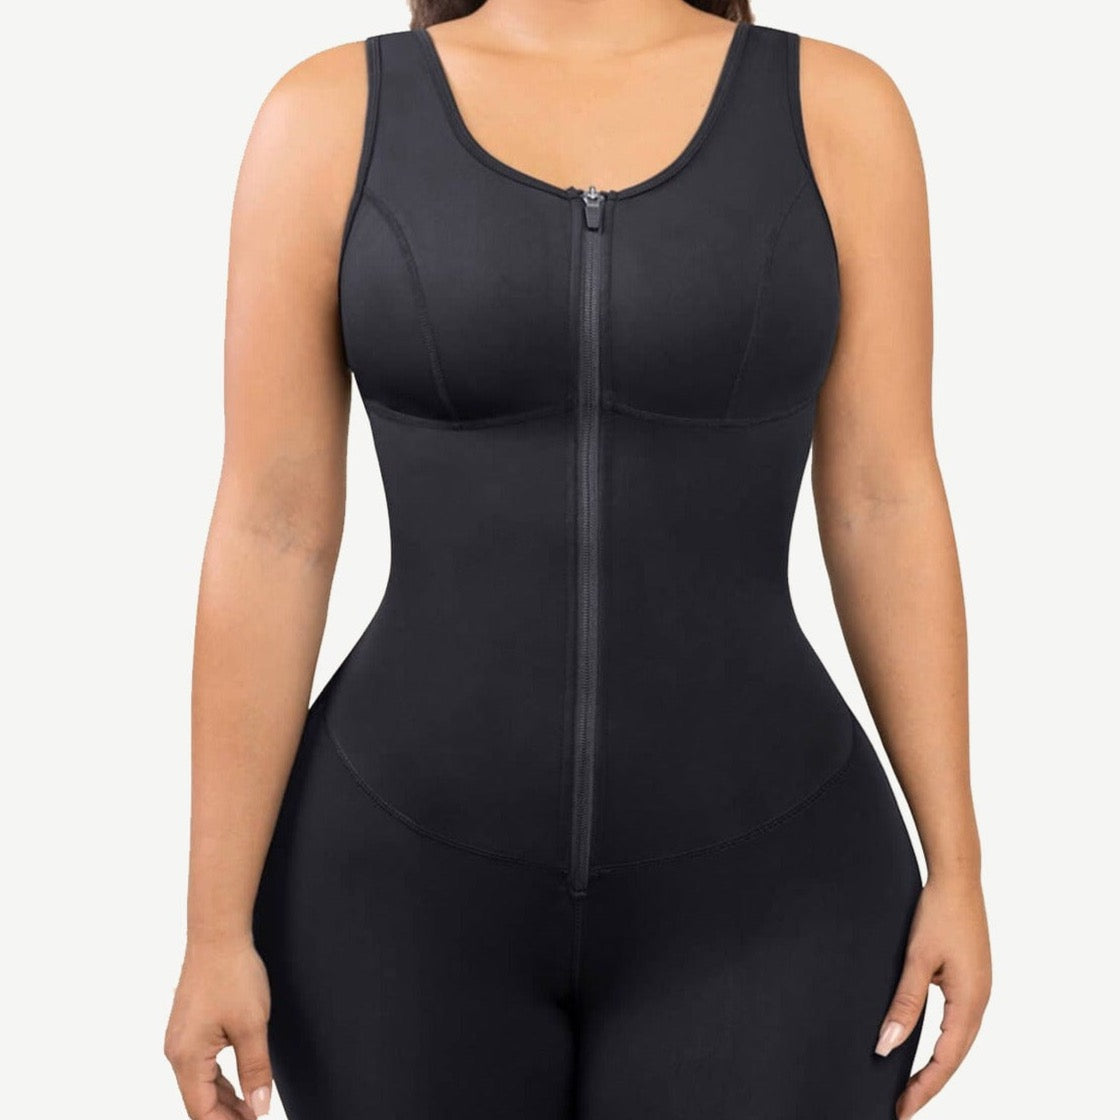 a woman wearing a black bodysuit with zippers